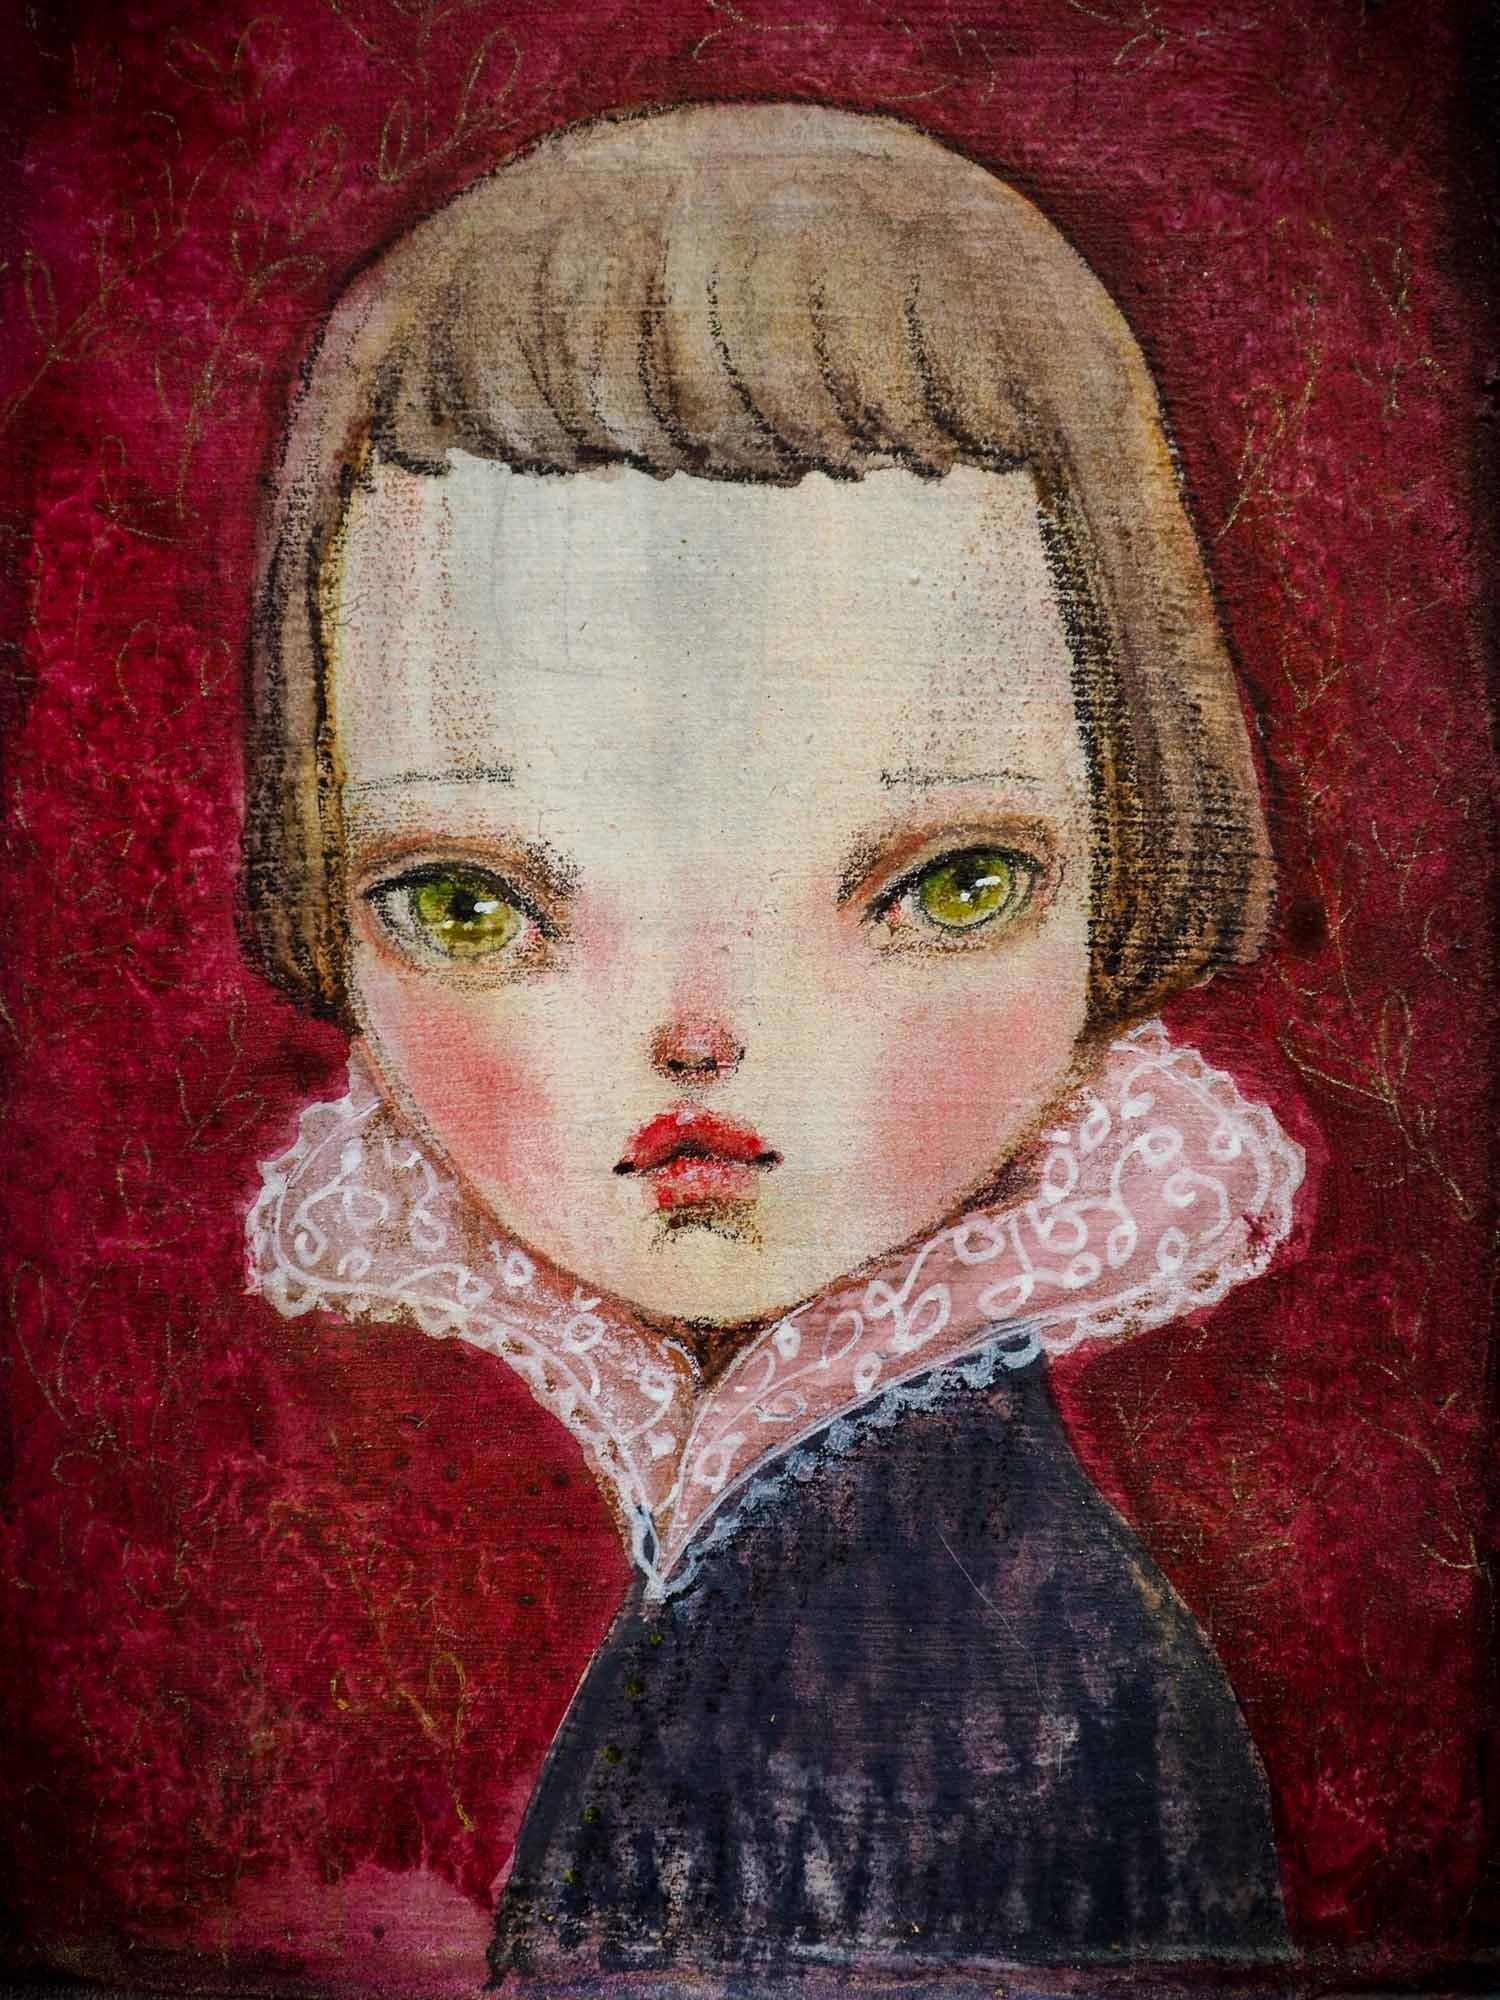 An original watercolor painting by Danita Art. Royal woman portrait with green eyes in watercolor over metal by Mexican mixed media painter and doll maker Danita.